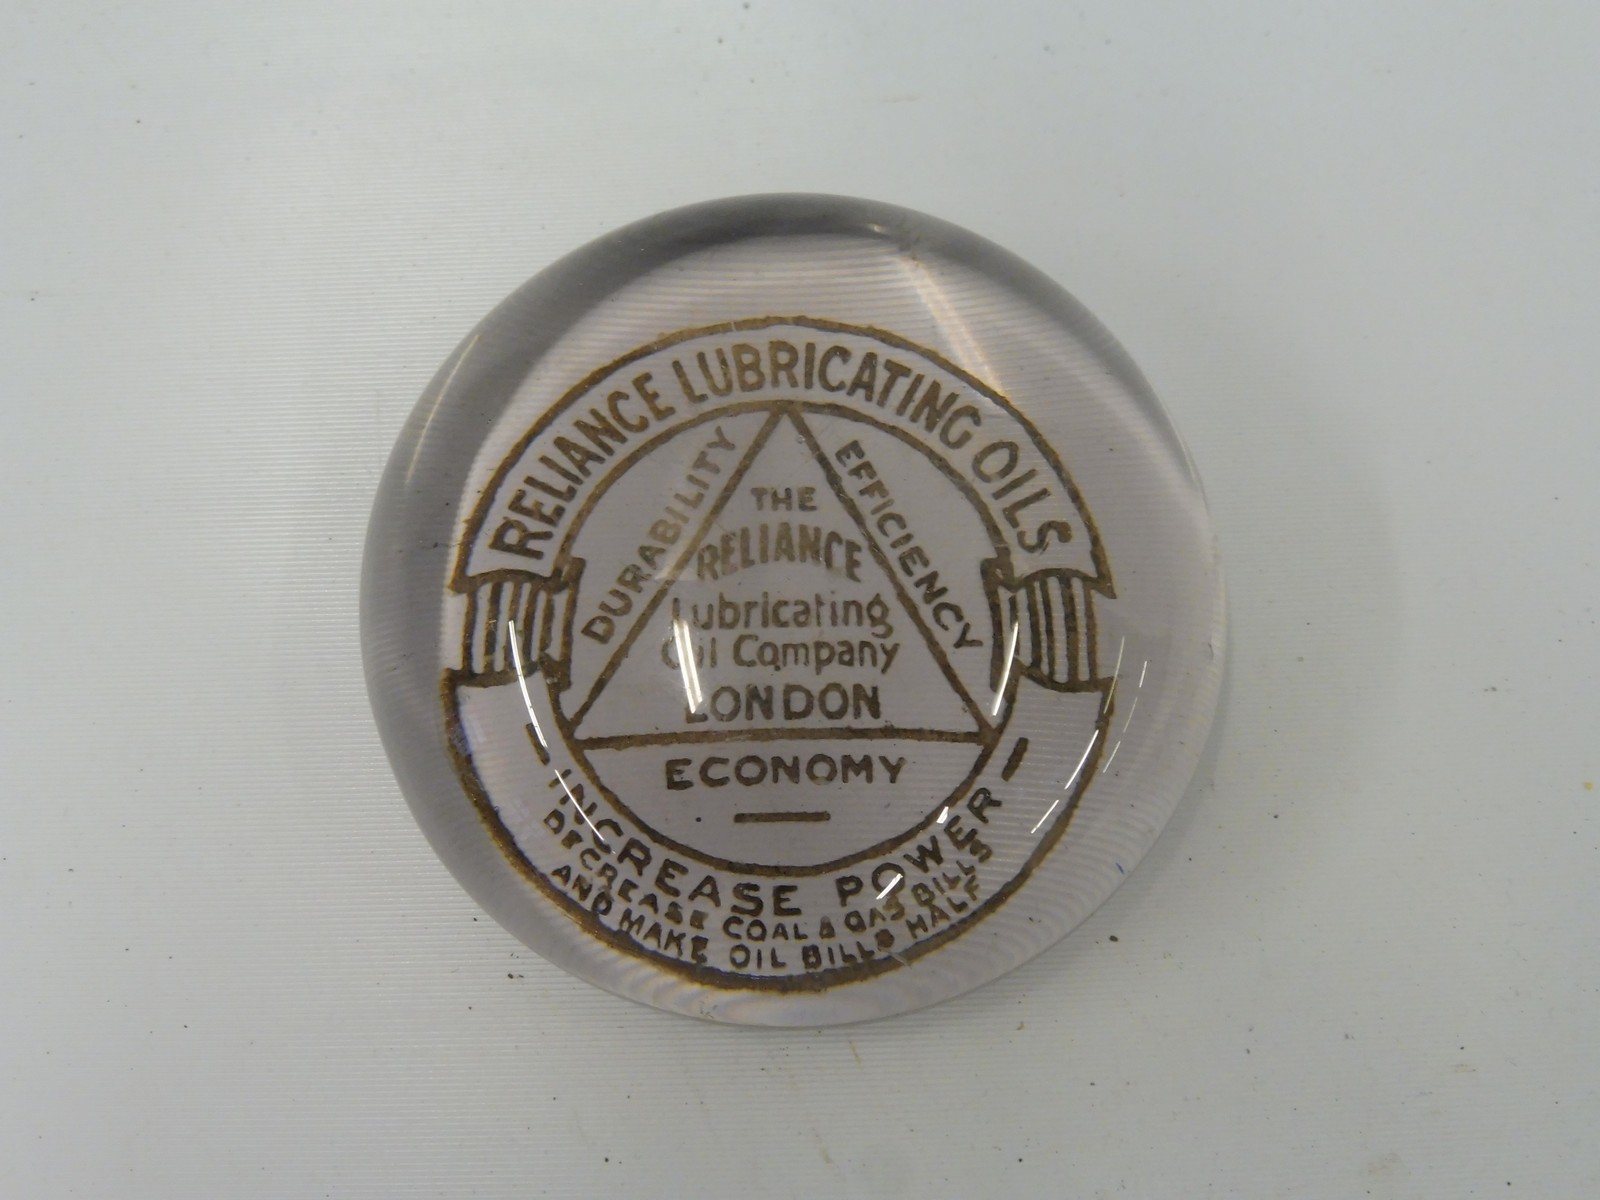 A Reliance Lubricating Oil Company of London glass paperweight.